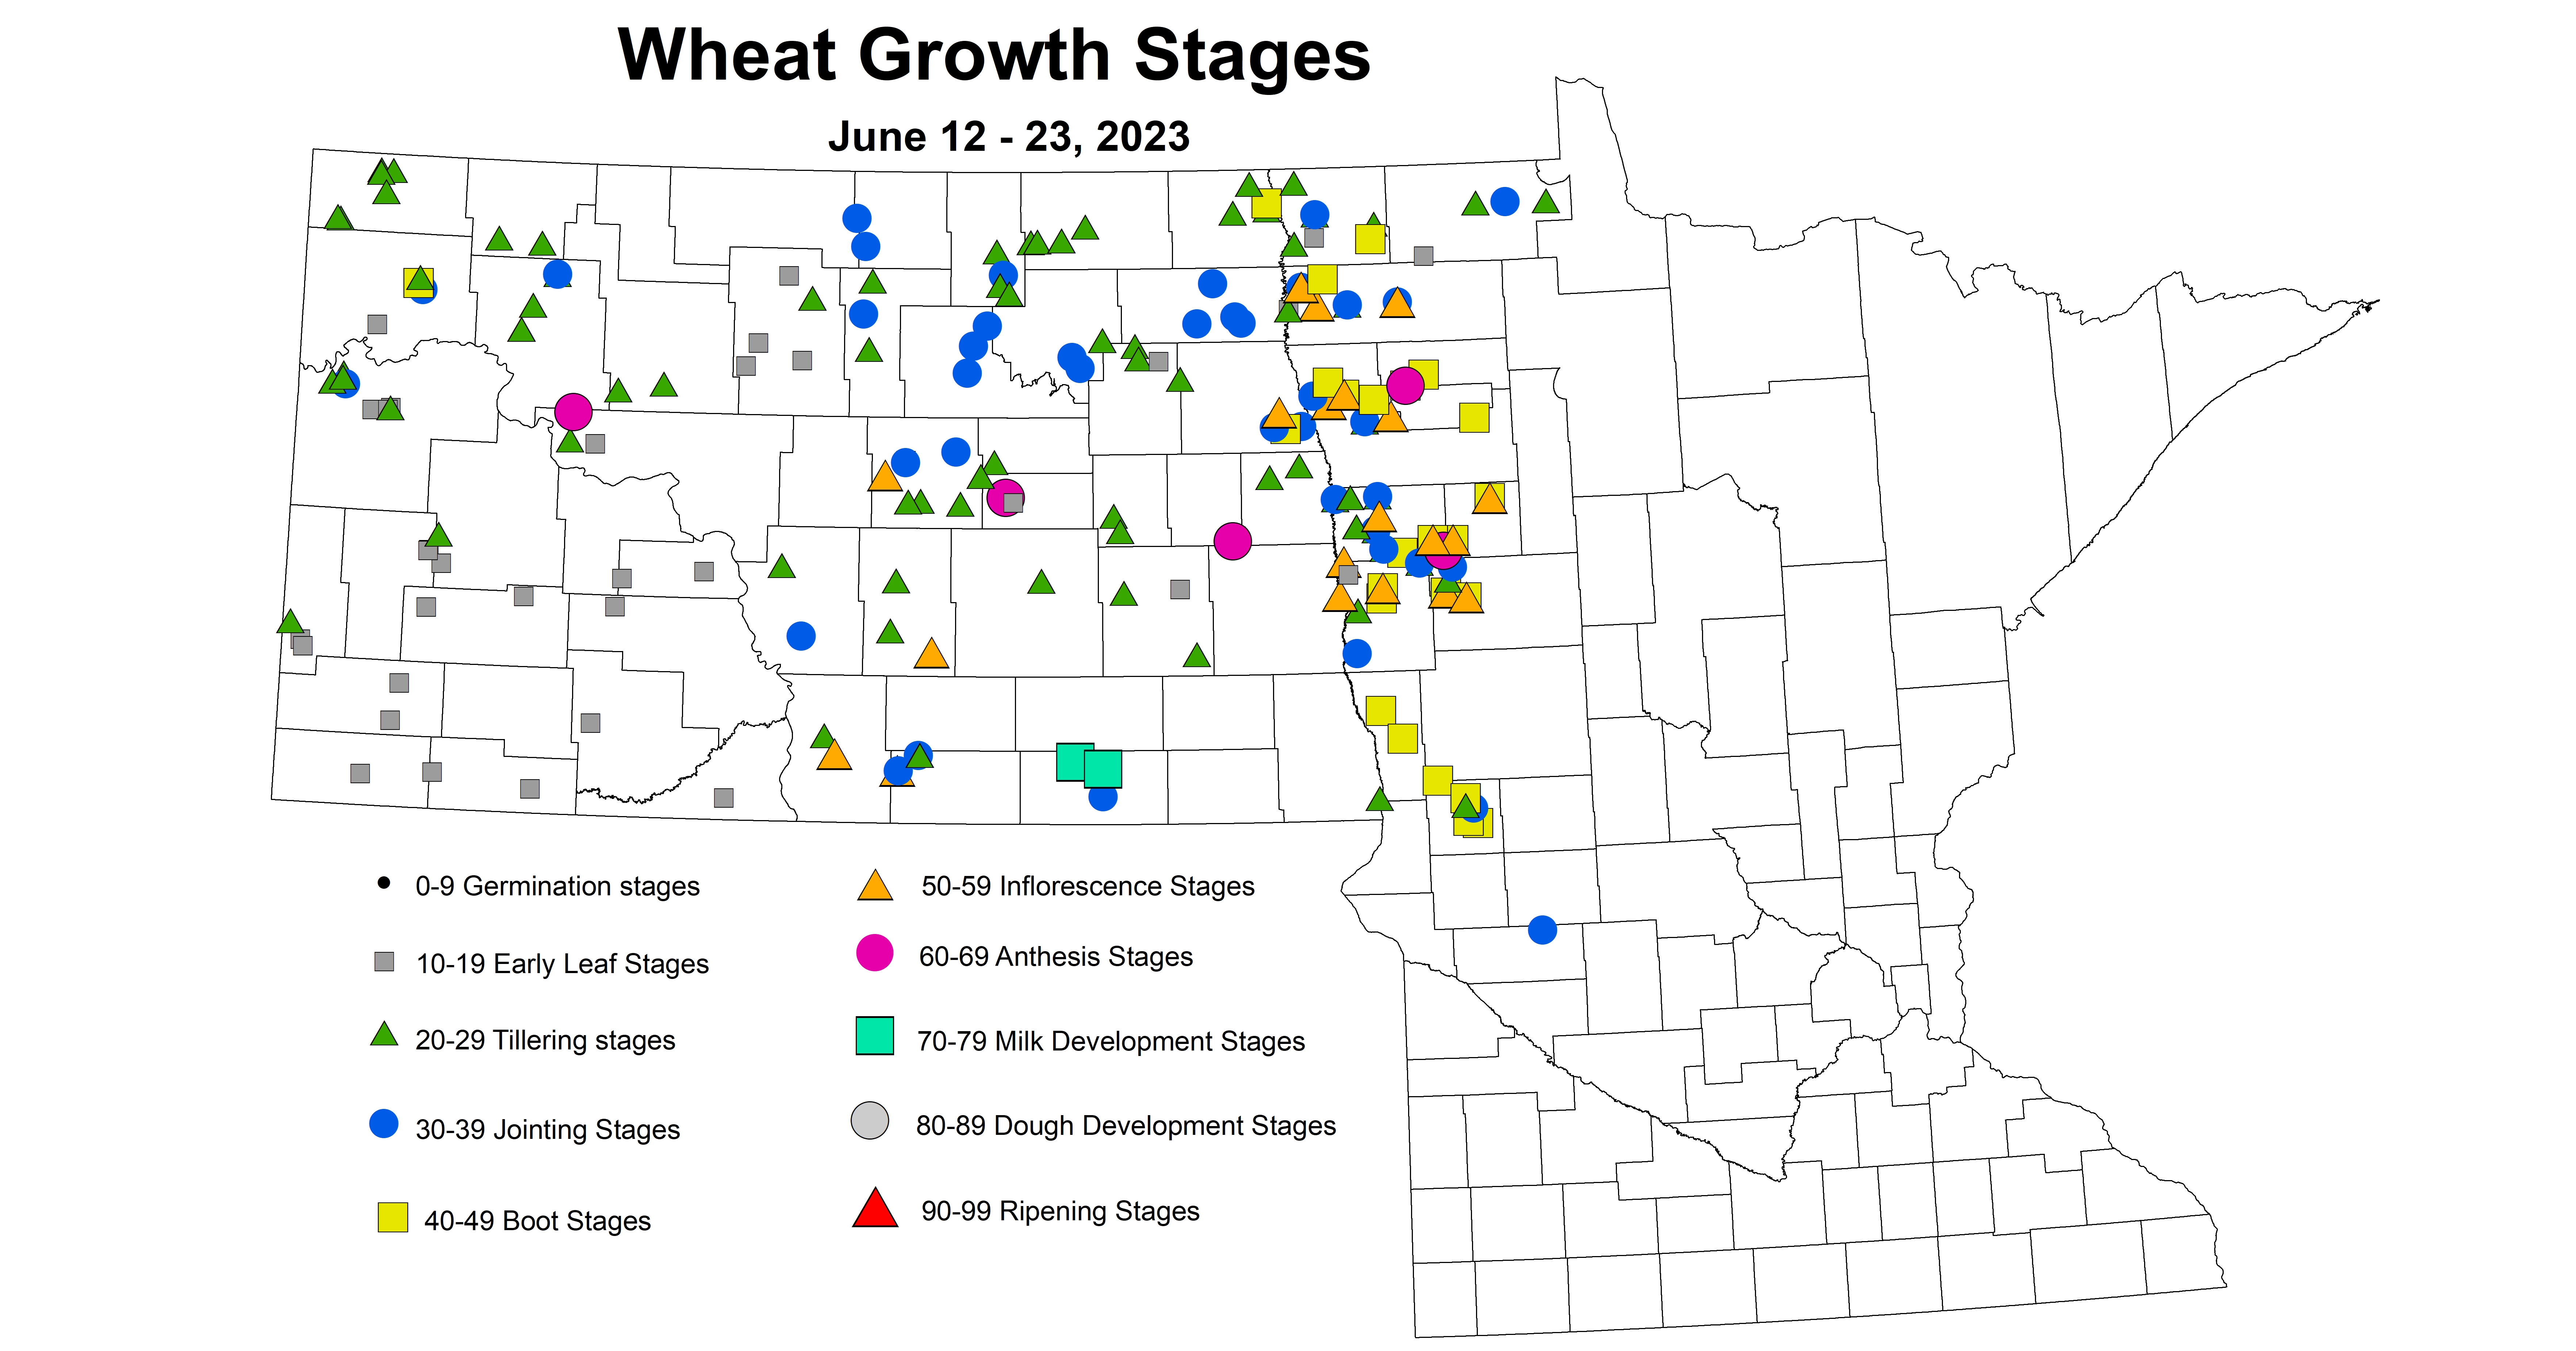 wheat growth stages June 12-23 2023 updated